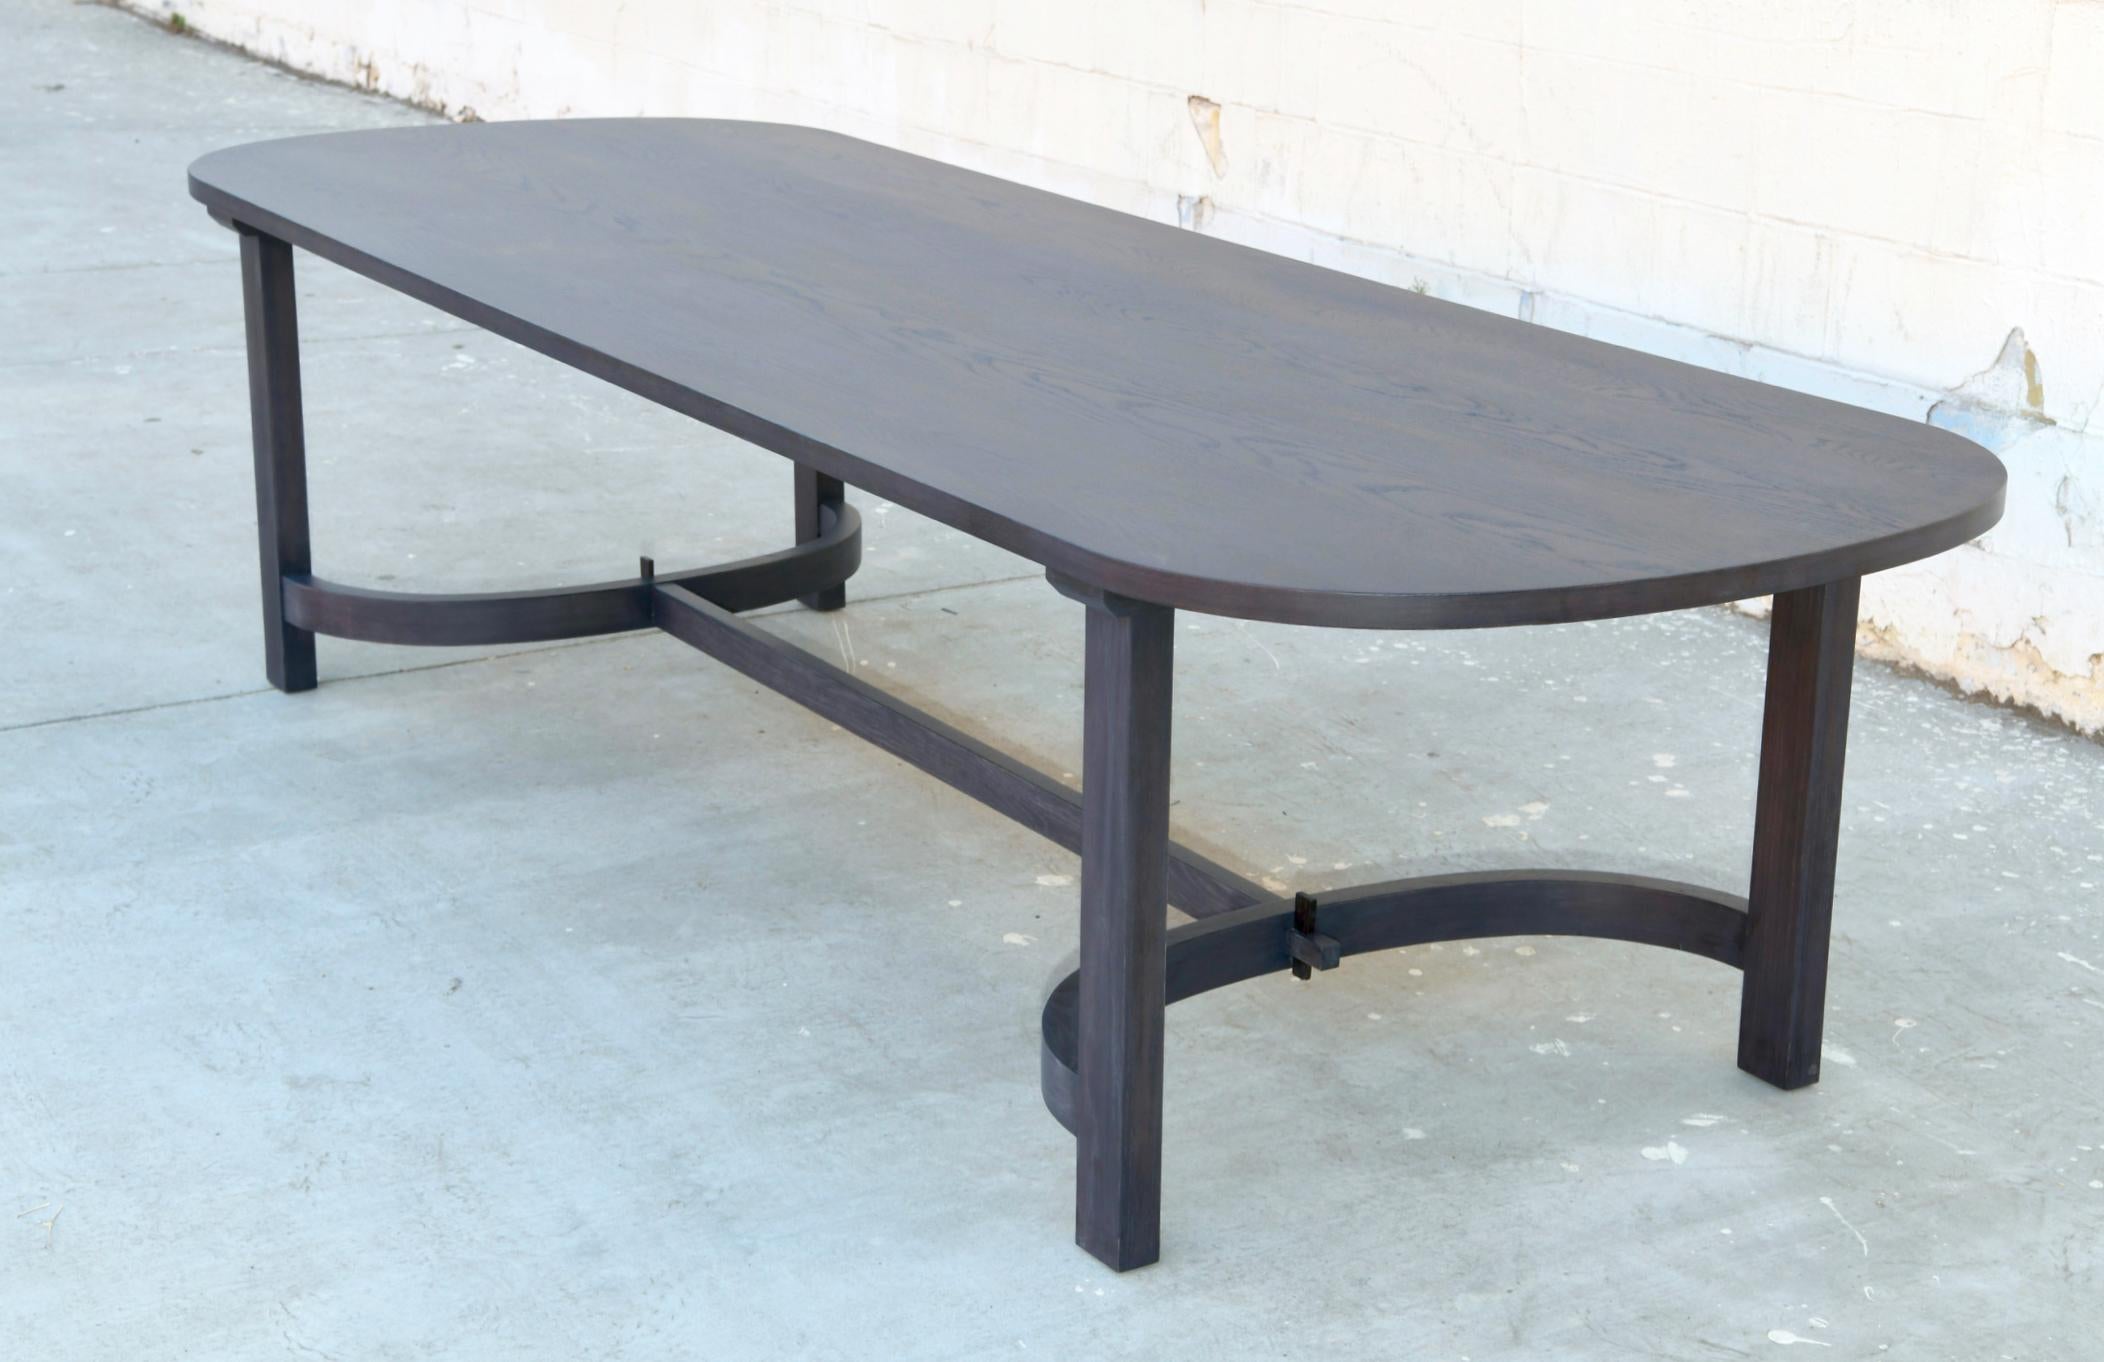 This ebonized racetrack table, designed in collaboration with Jake Alexander Arnold, is seen here in 120